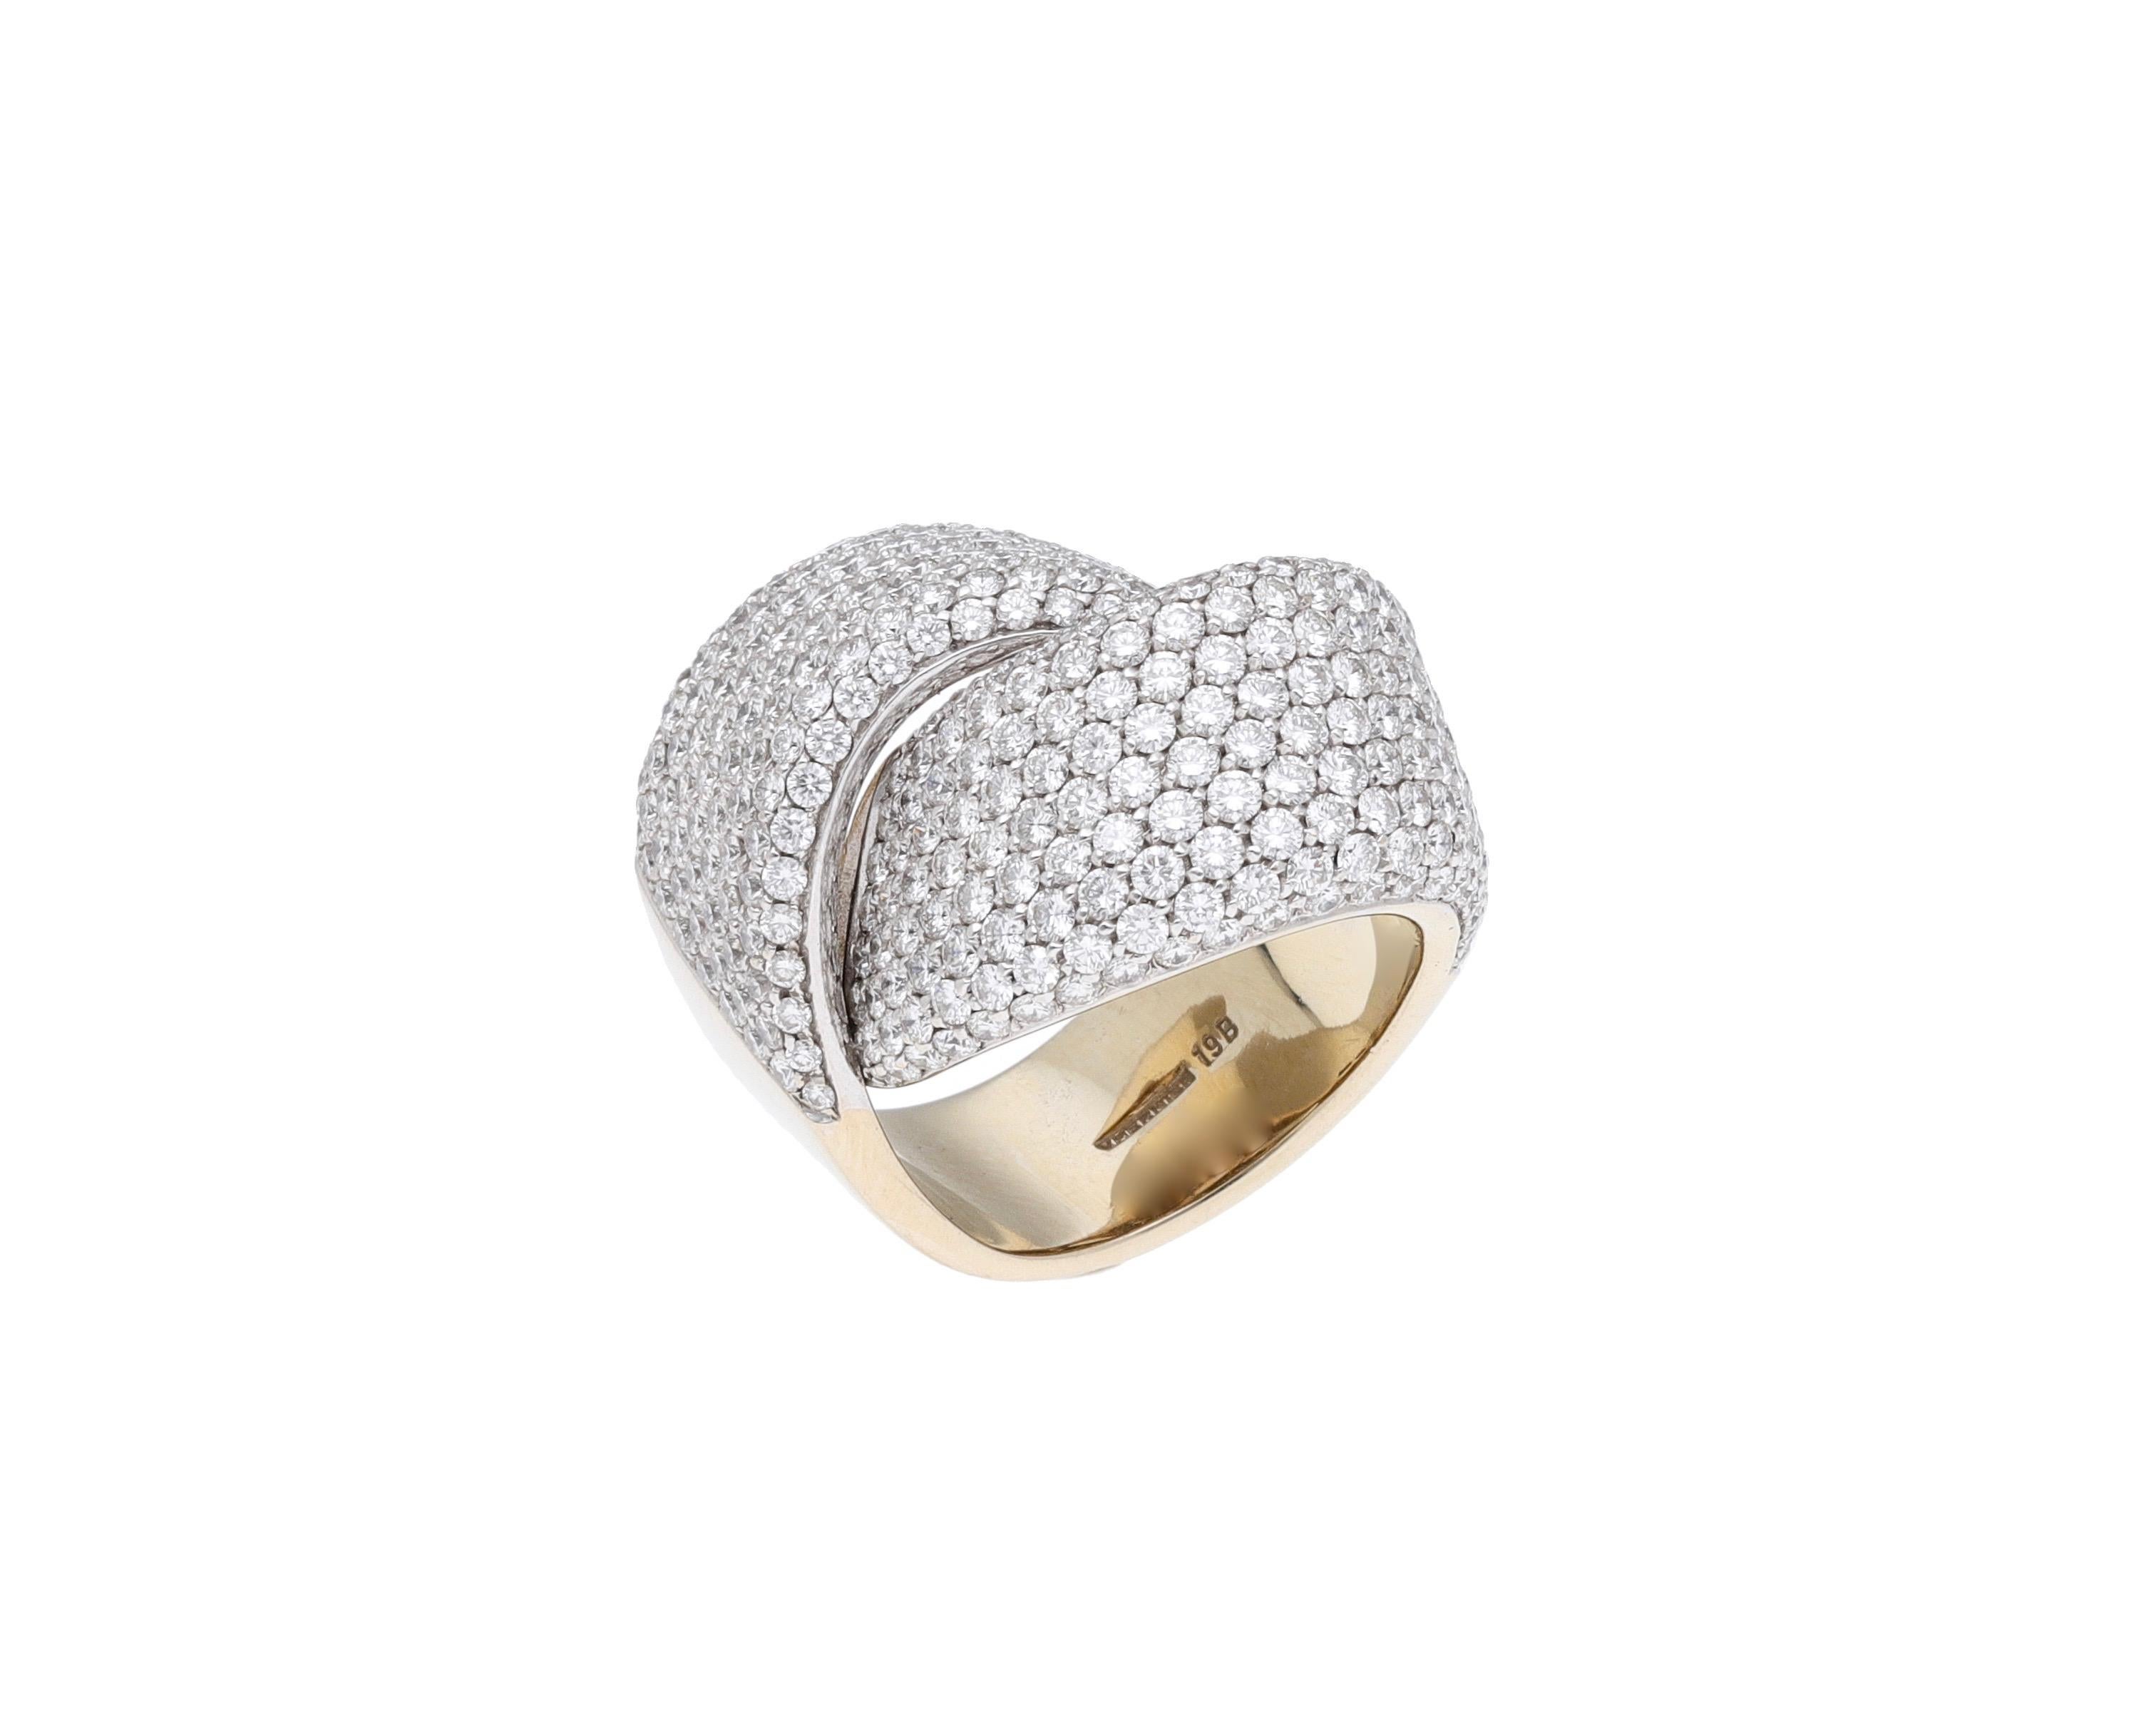 Abbraccio Ring in 18 kt. white gold not rhodium plated and 5.93 ct. of round-cut diamonds.
( diamond quality DEF, IF to VVS )
This iconic design is signed by Vhernier.
Handmade in Italy.
Ring size 5
Weight gr. 32.30
The ring is resizable.